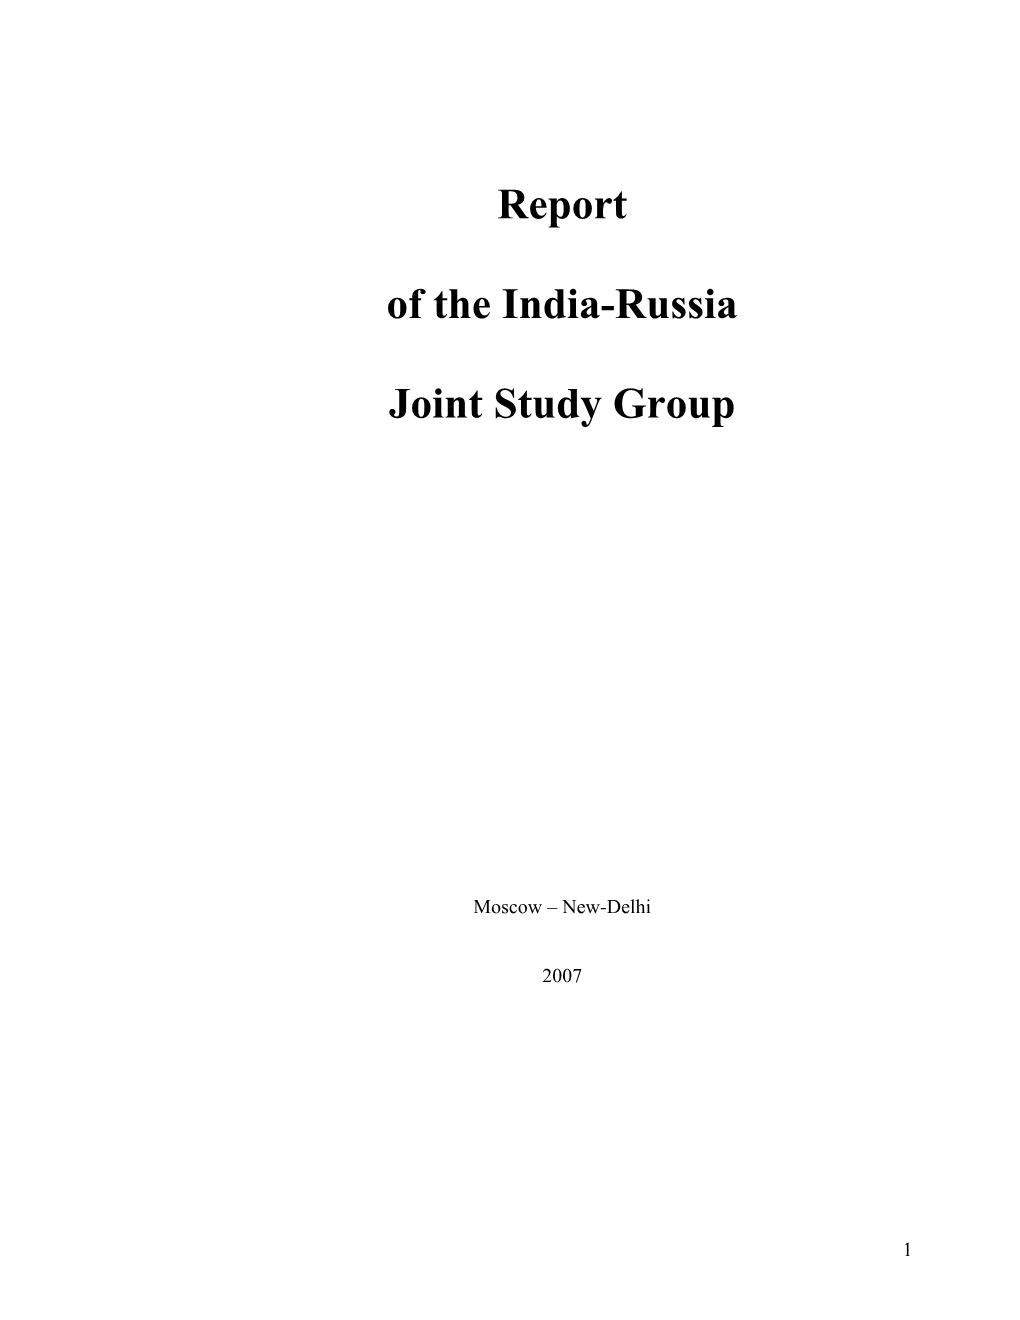 Report of the India Russia Joint Study Group